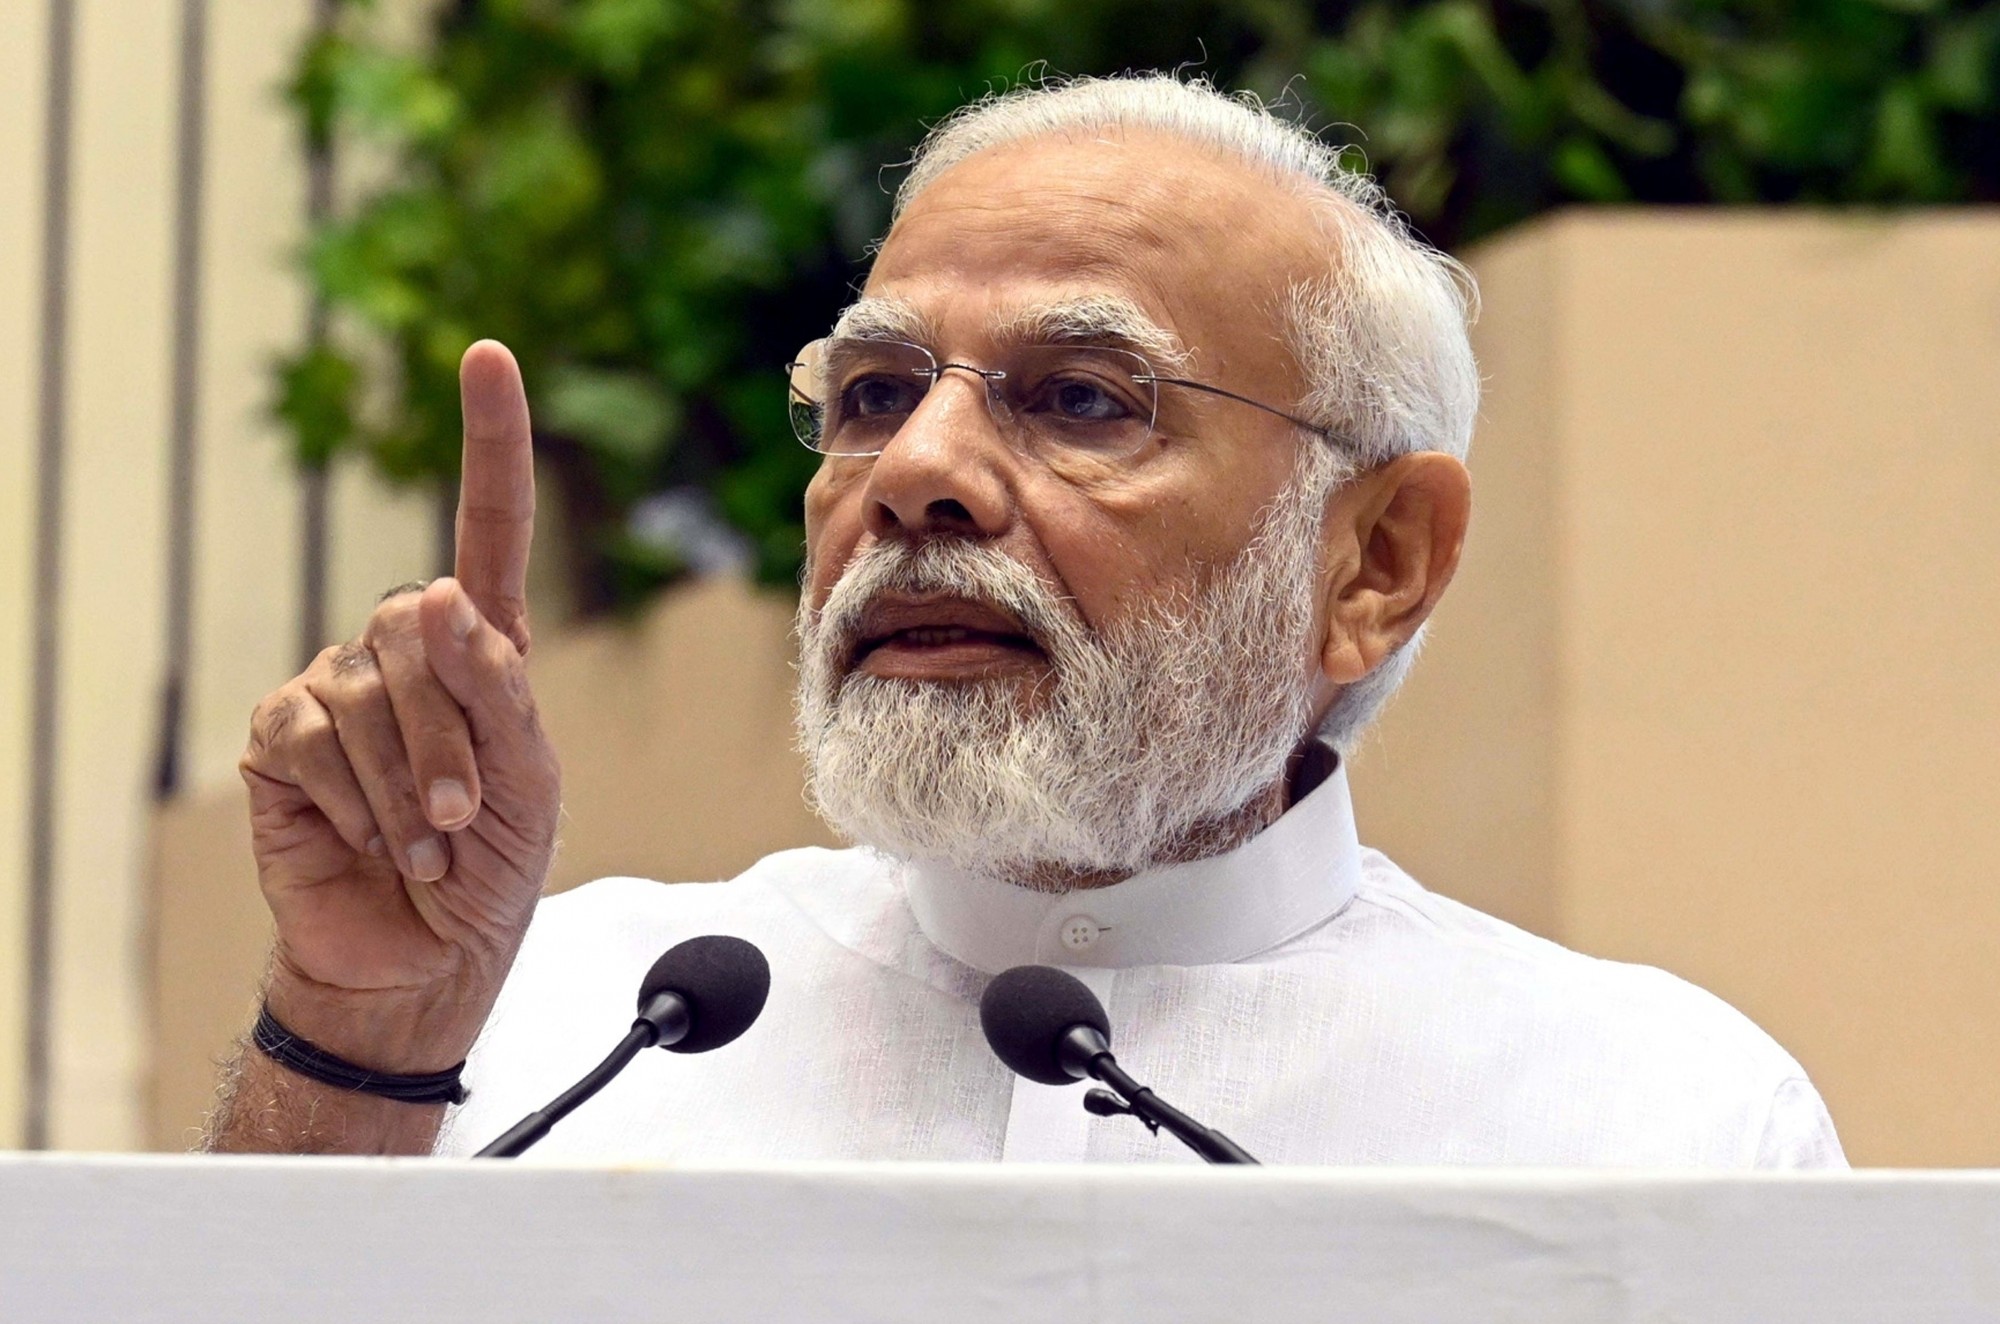 47.8 Crore Jan Dhan accounts opened till date: Analyzing PM Modi’s financial inclusion scheme